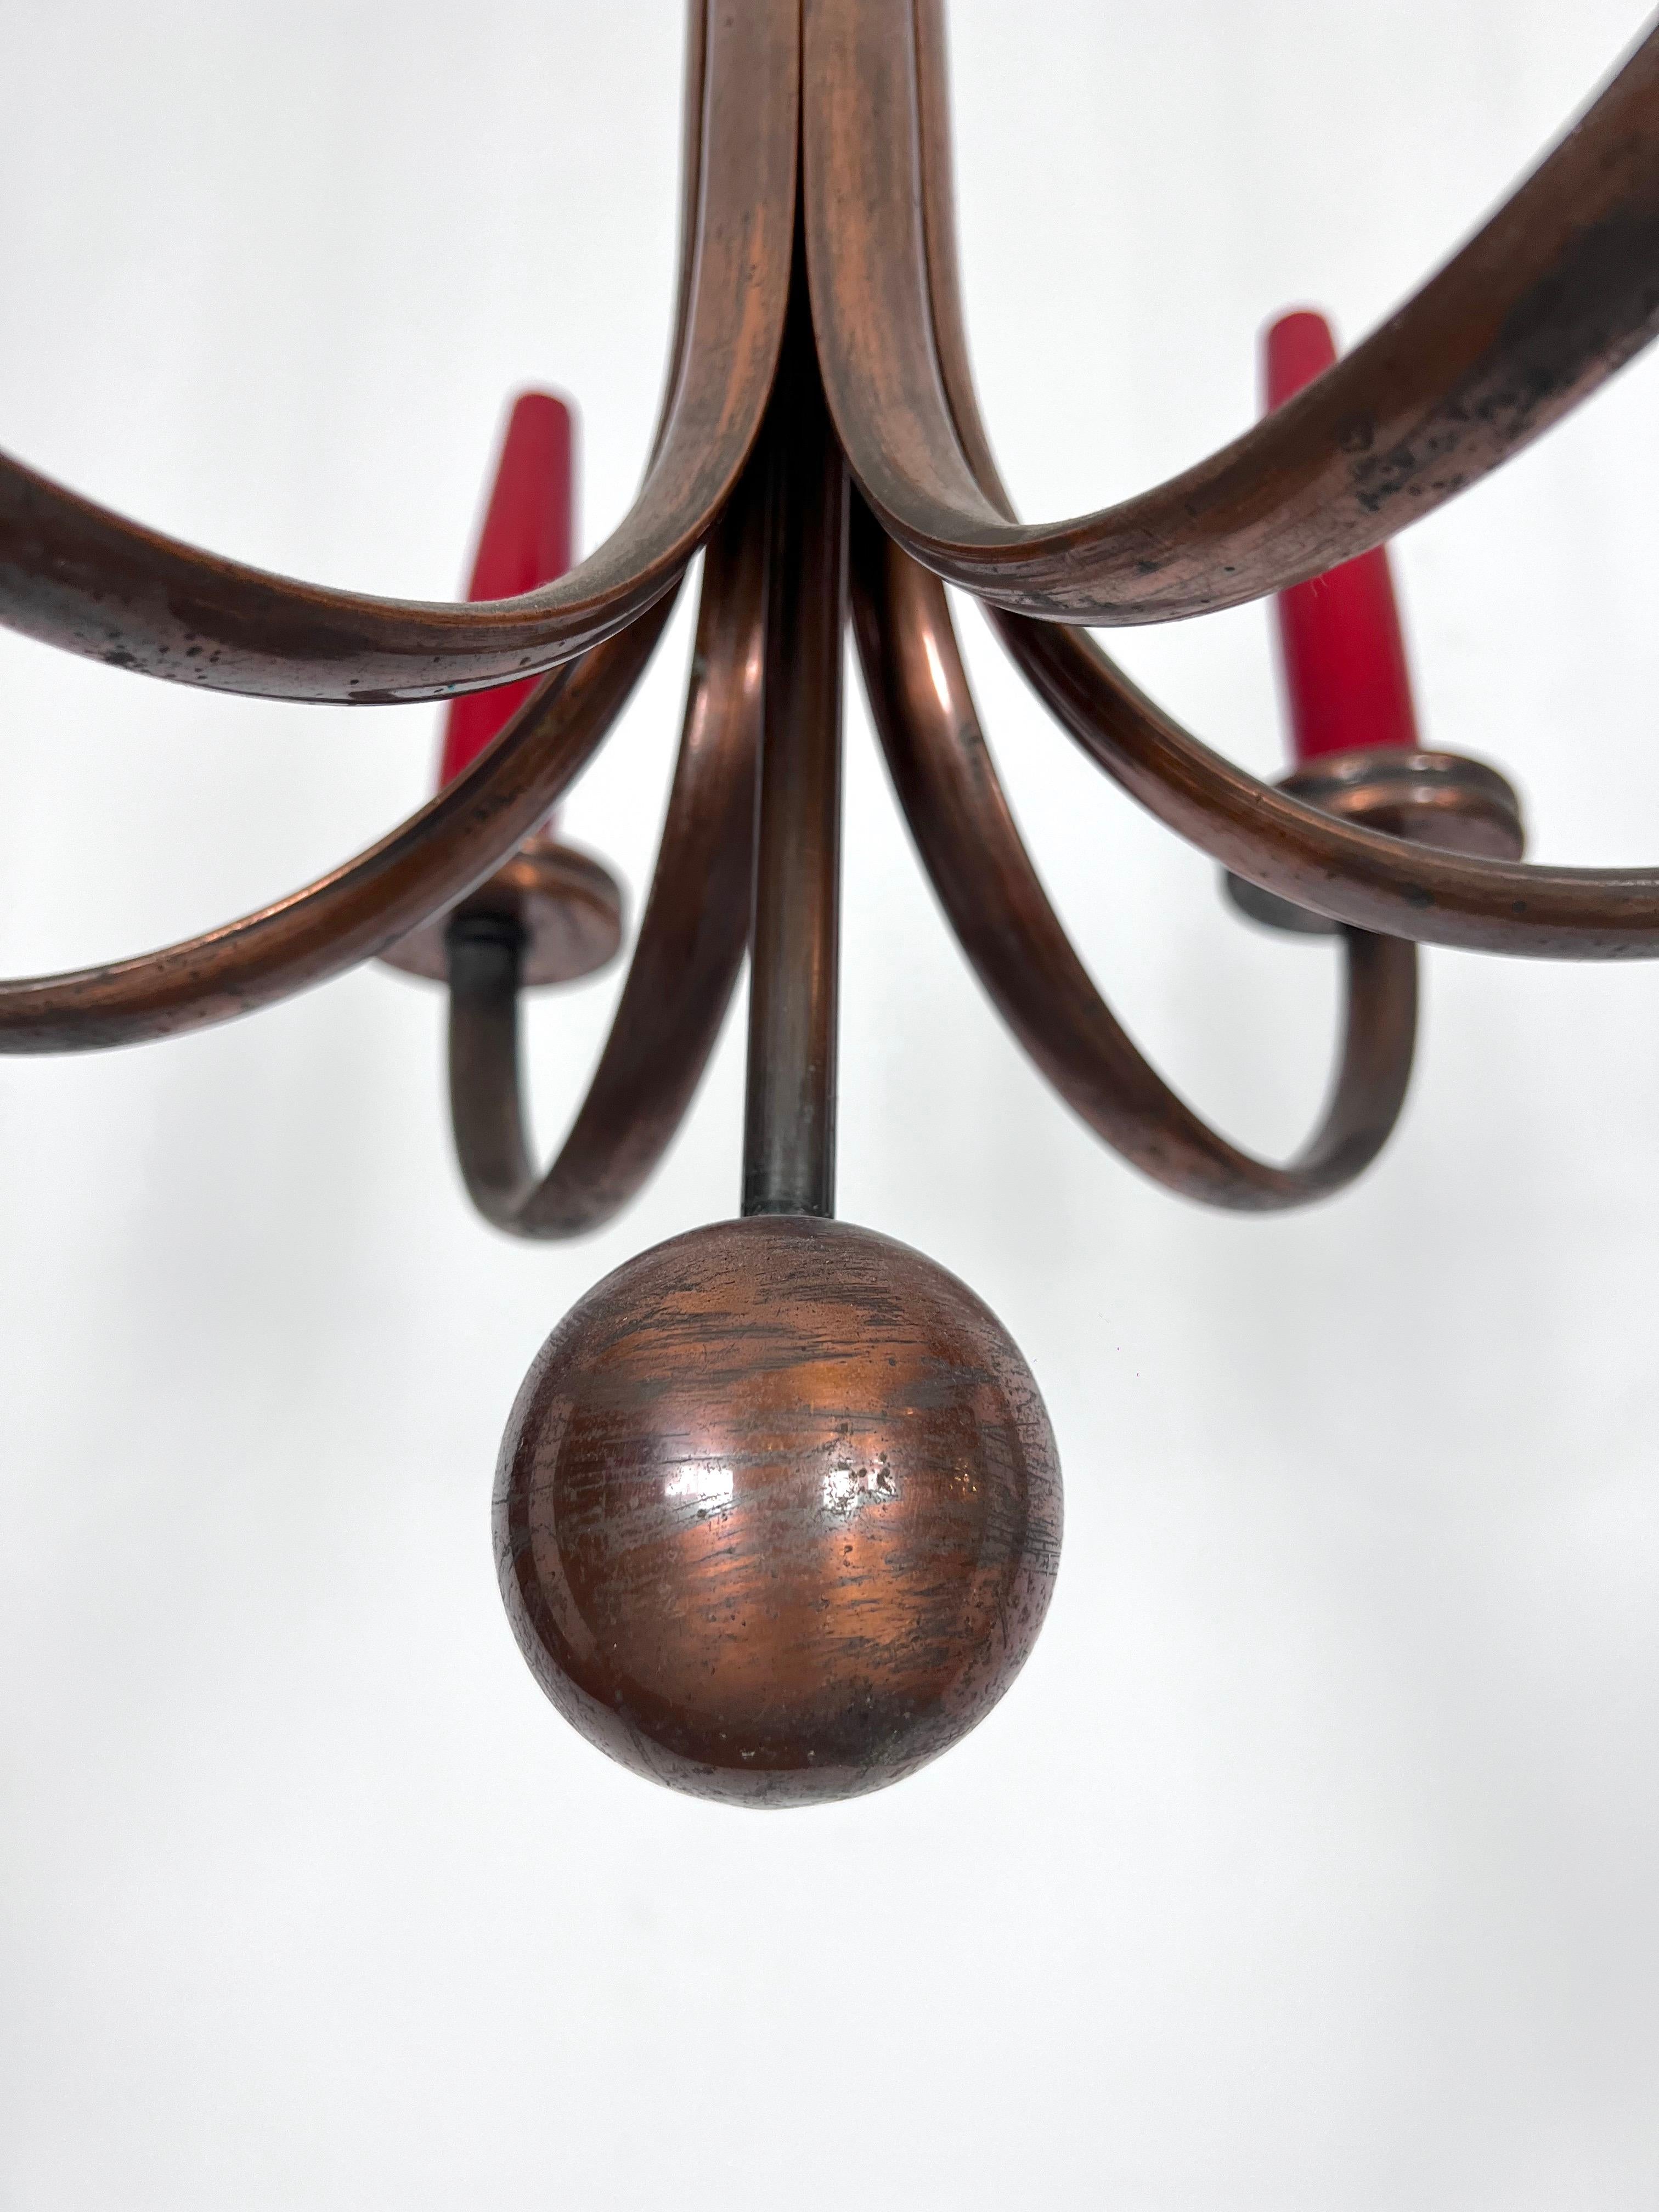 20th Century Mid-Century Modern Six Arms Copper Chandelier in Gio Ponti Style, Italy 1950s For Sale